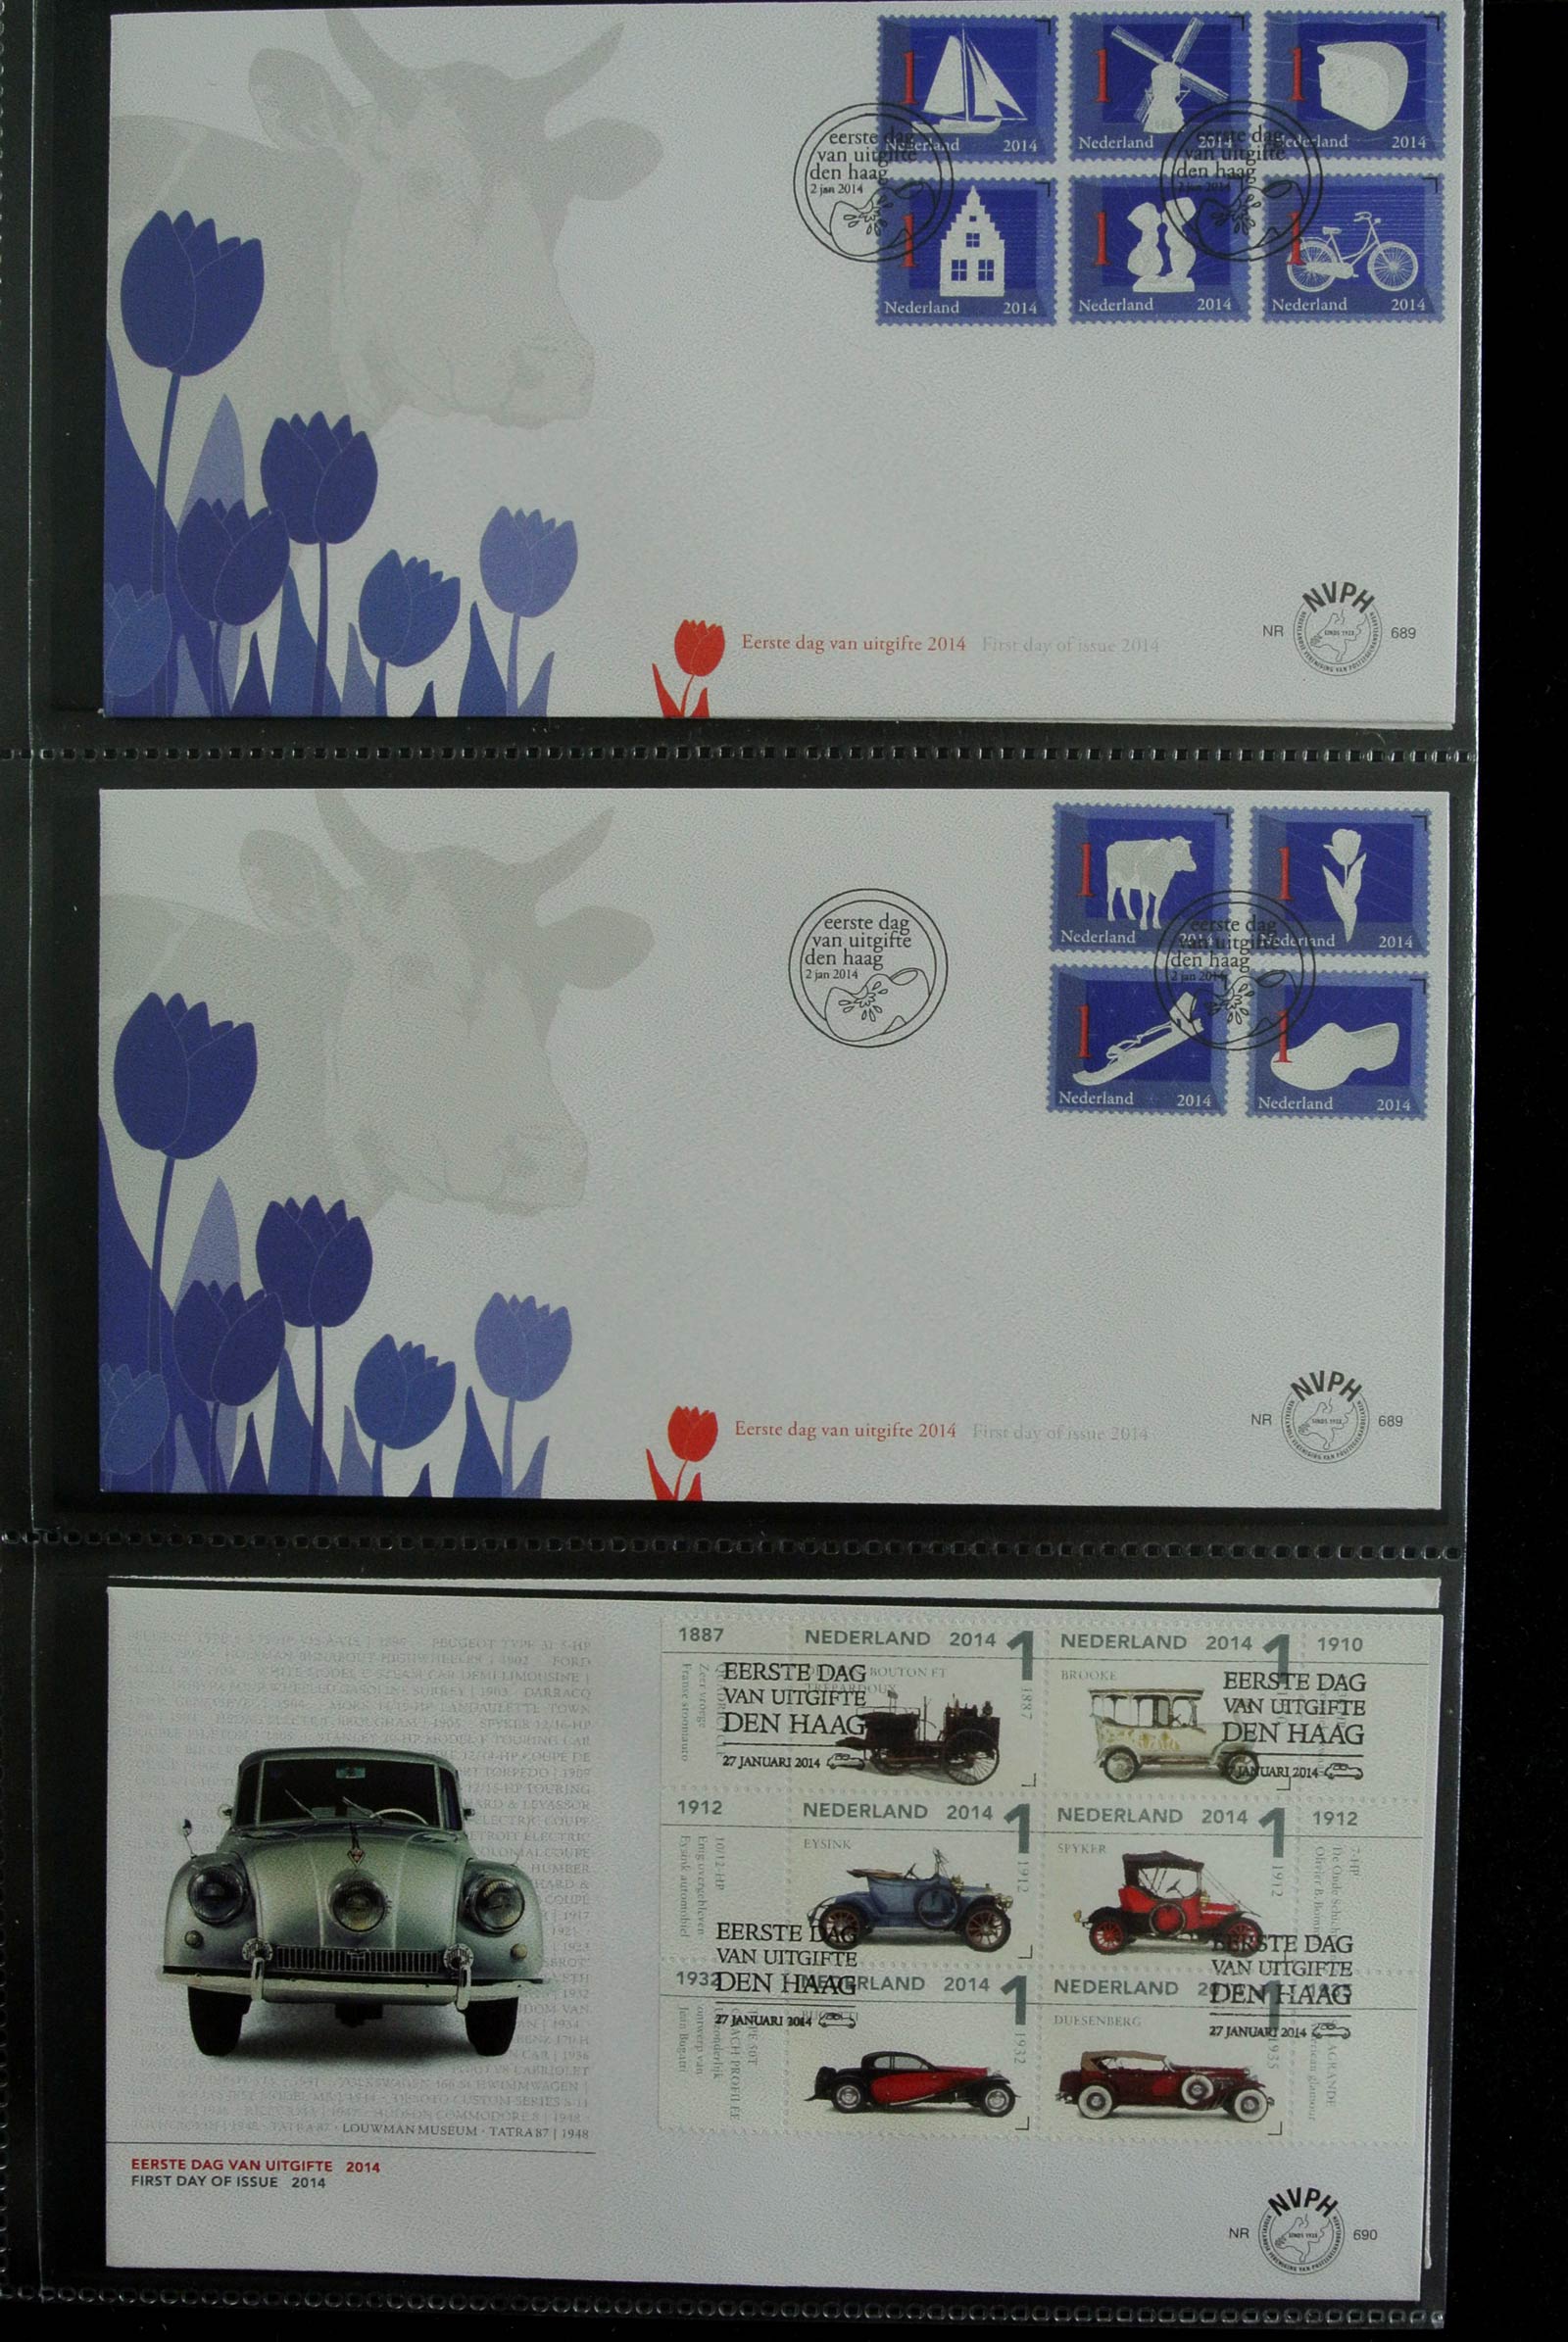 26929 281 - 26929 Netherlands 1950-2015 FDC's.